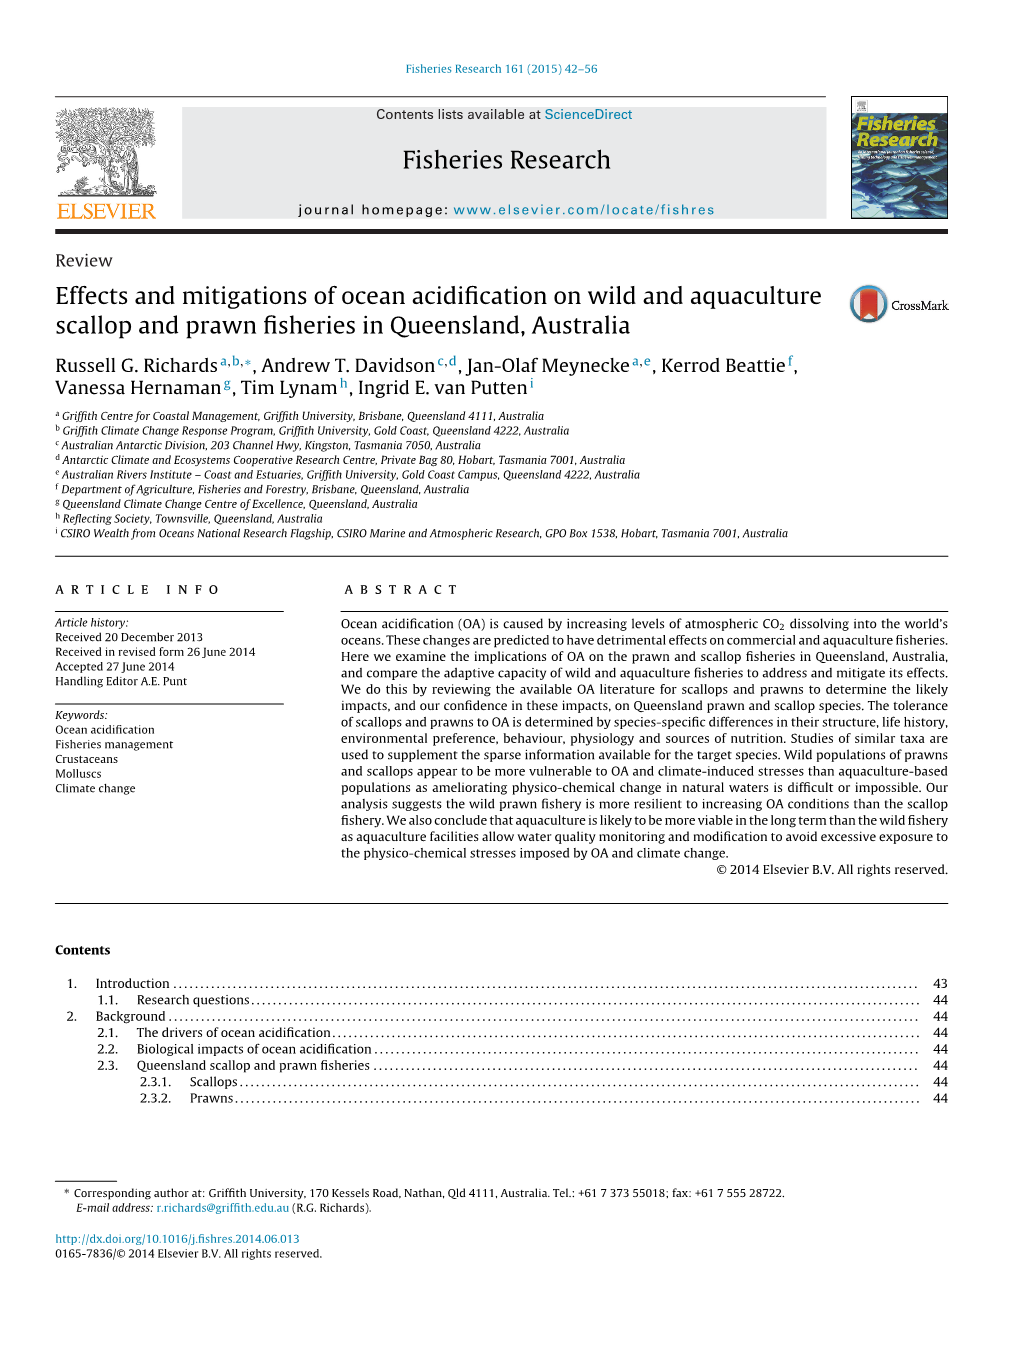 Effects and Mitigations of Ocean Acidification on Wild and Aquaculture Scallop and Prawn Fisheries in Queensland, Australia